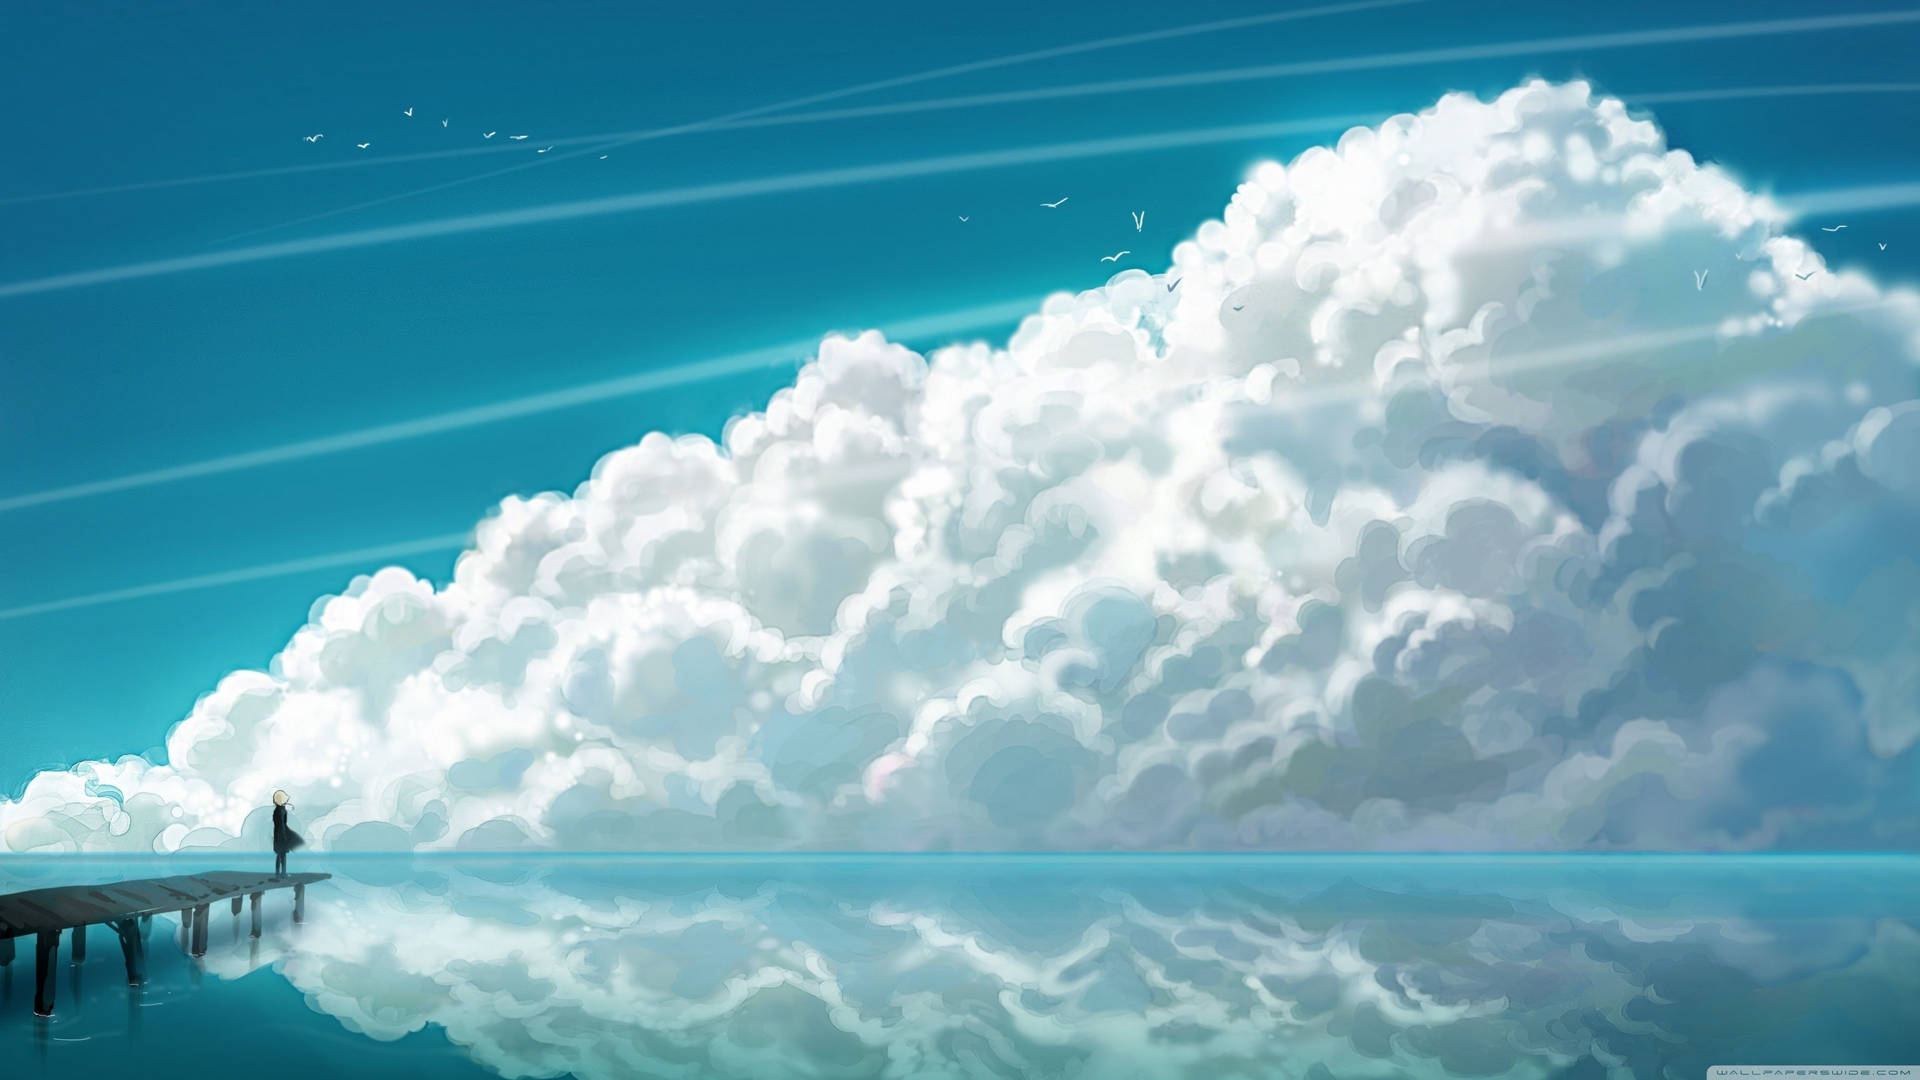 HD wallpaper of white clouds and clear blue ocean. 